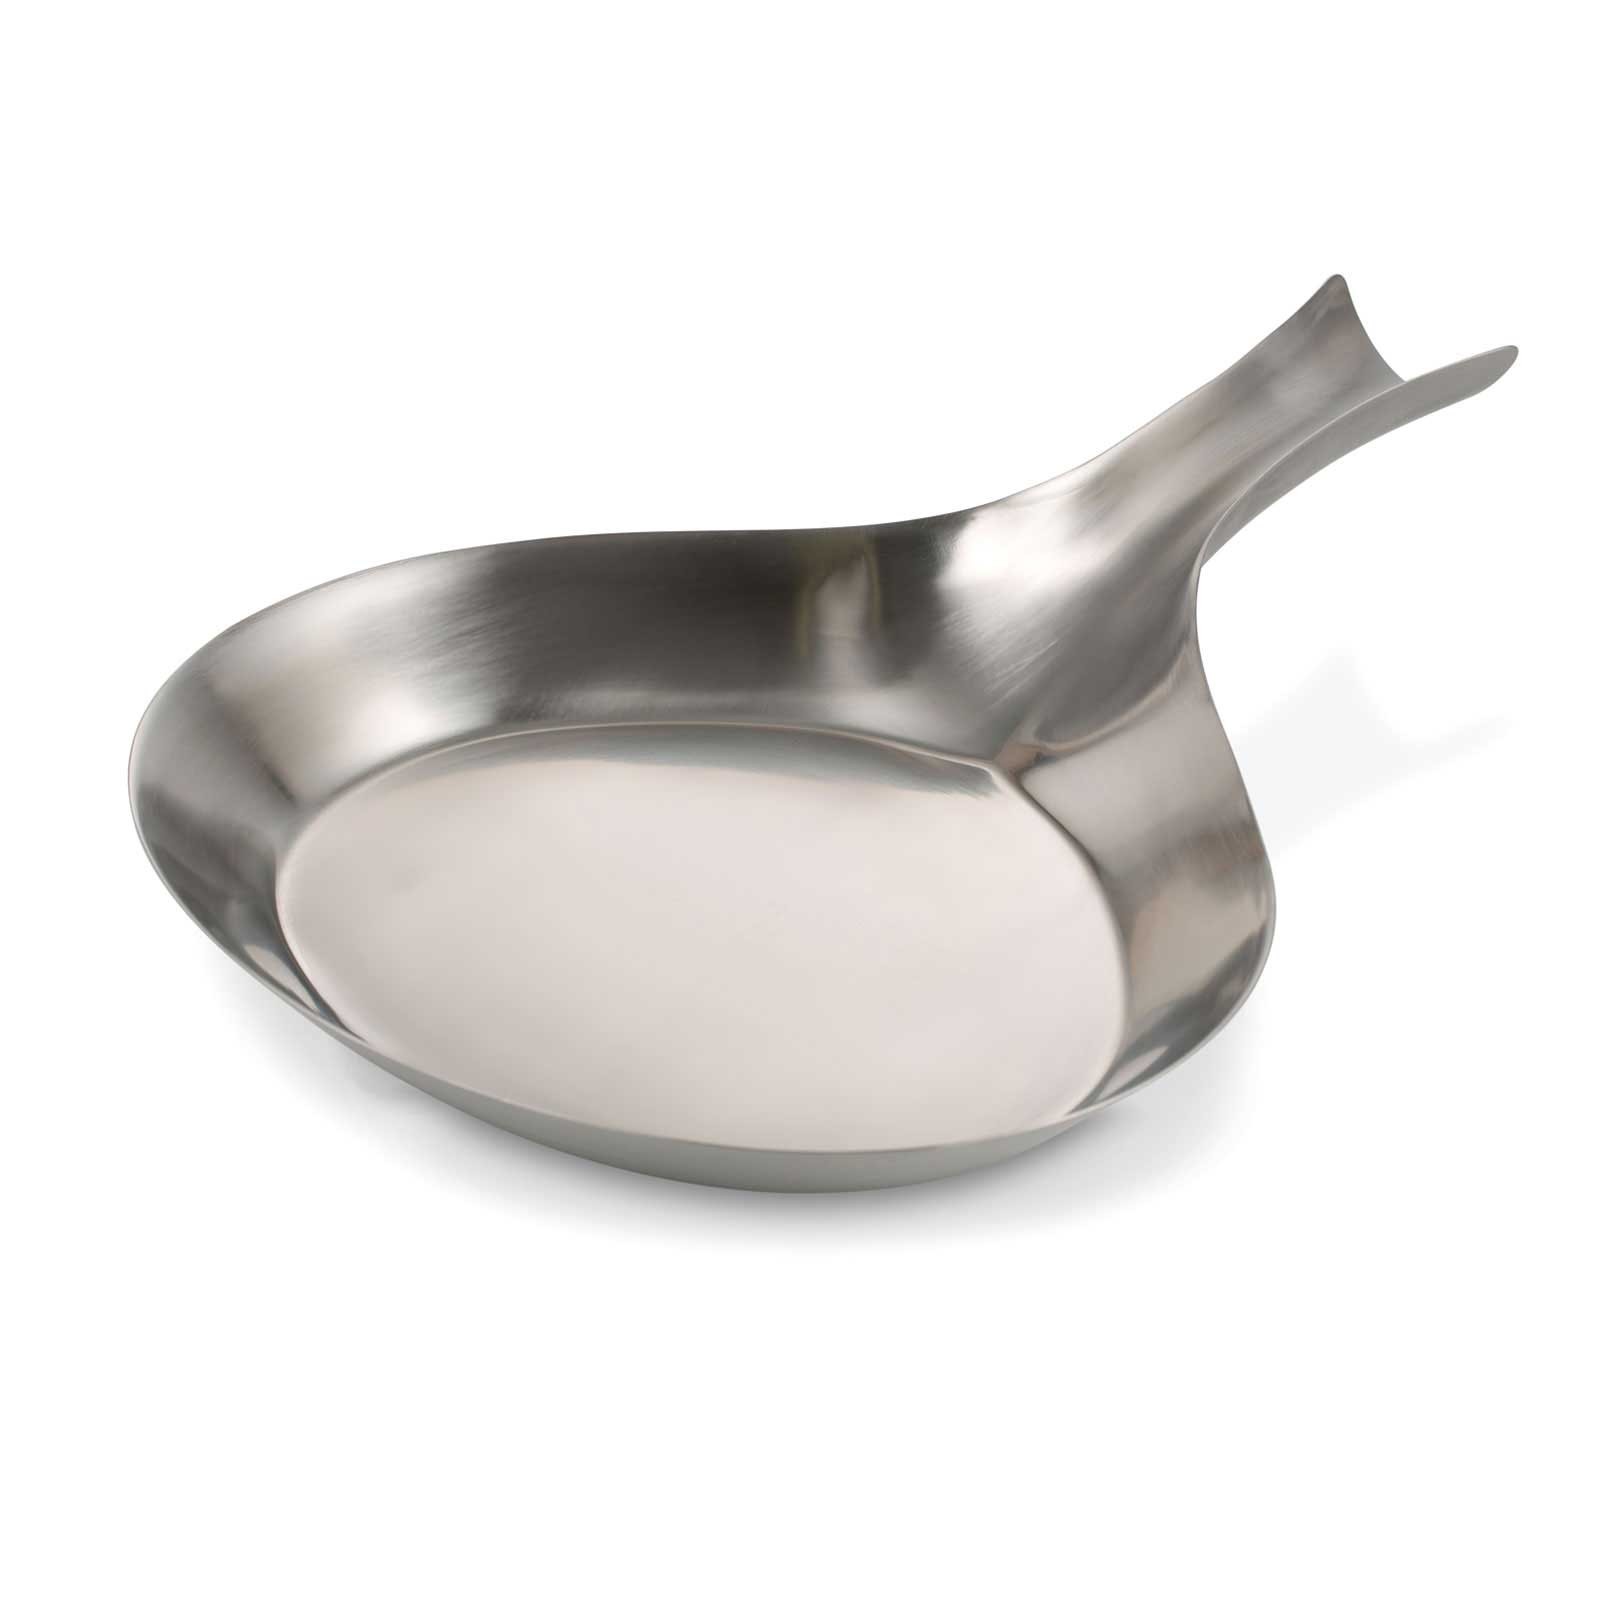 Bon Chef 5111 Stainless Steel Serving Skillet with Brush Finish, 8" Dia.